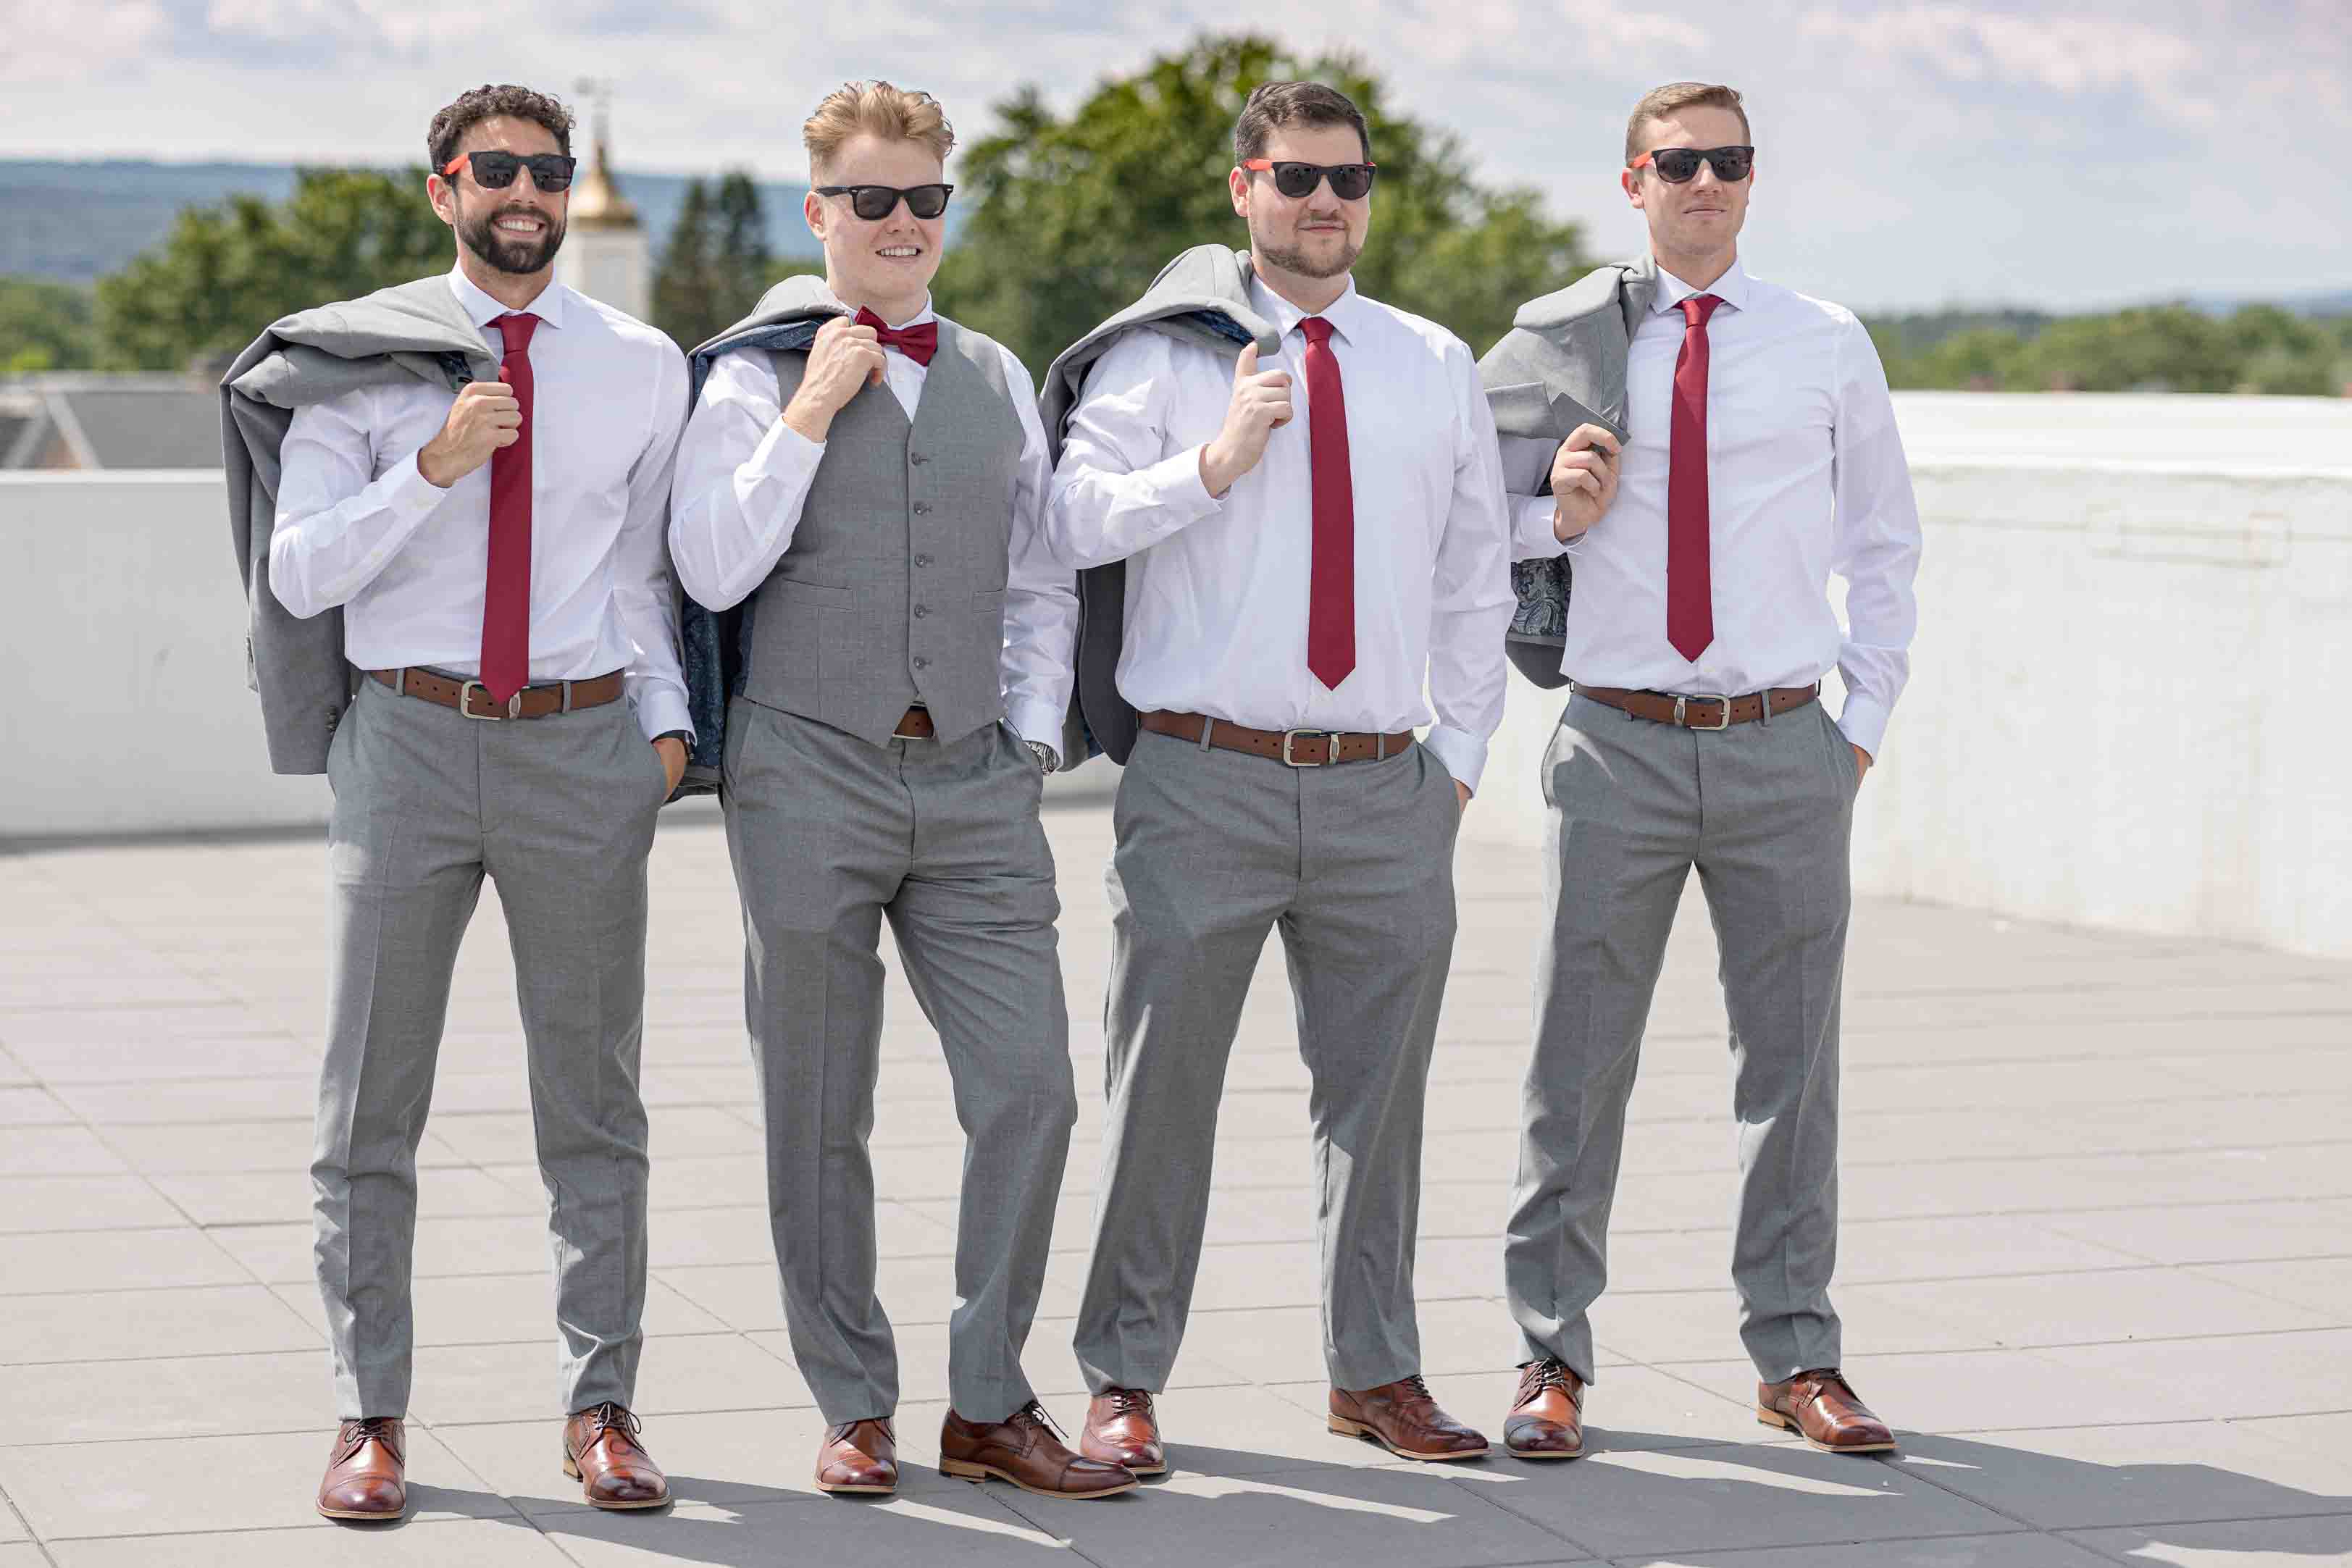 Groom and groomsmen pre-wedding looking cool, wearing matching sunglasses. Rooftop Frog Alley Brewing in Schenectady, NY. Albany Wedding Photographer. Groom Power Poses.